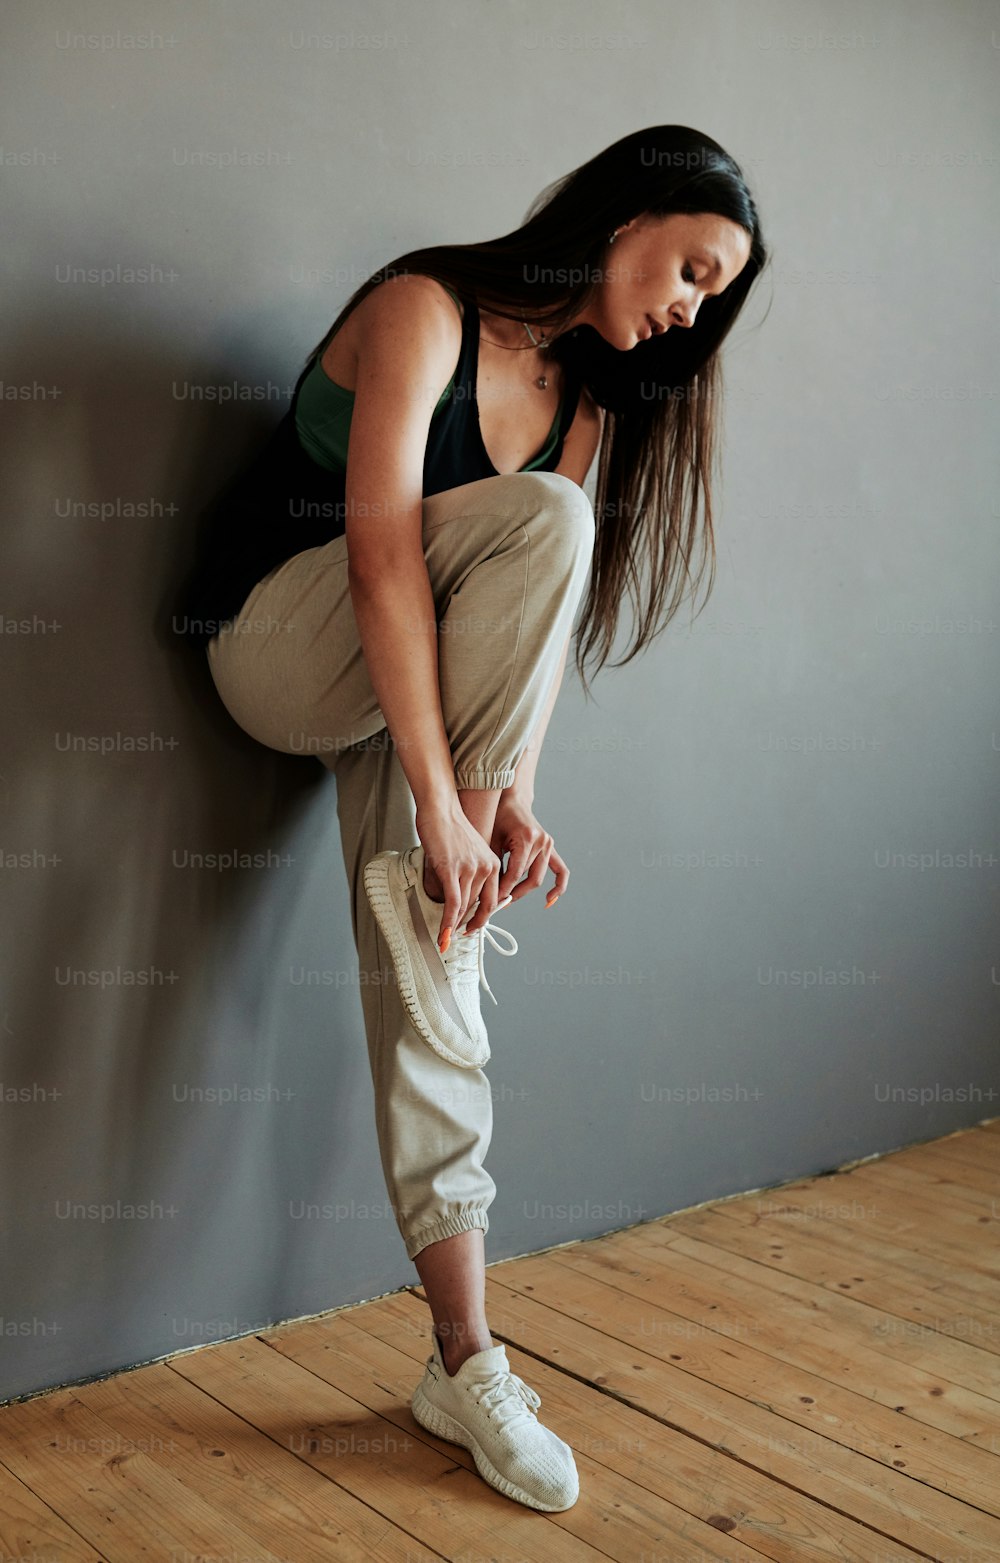 Youthful female performer in pants and tanktop tying shoe lace on white sneaker while standing against grey wall in loft studio